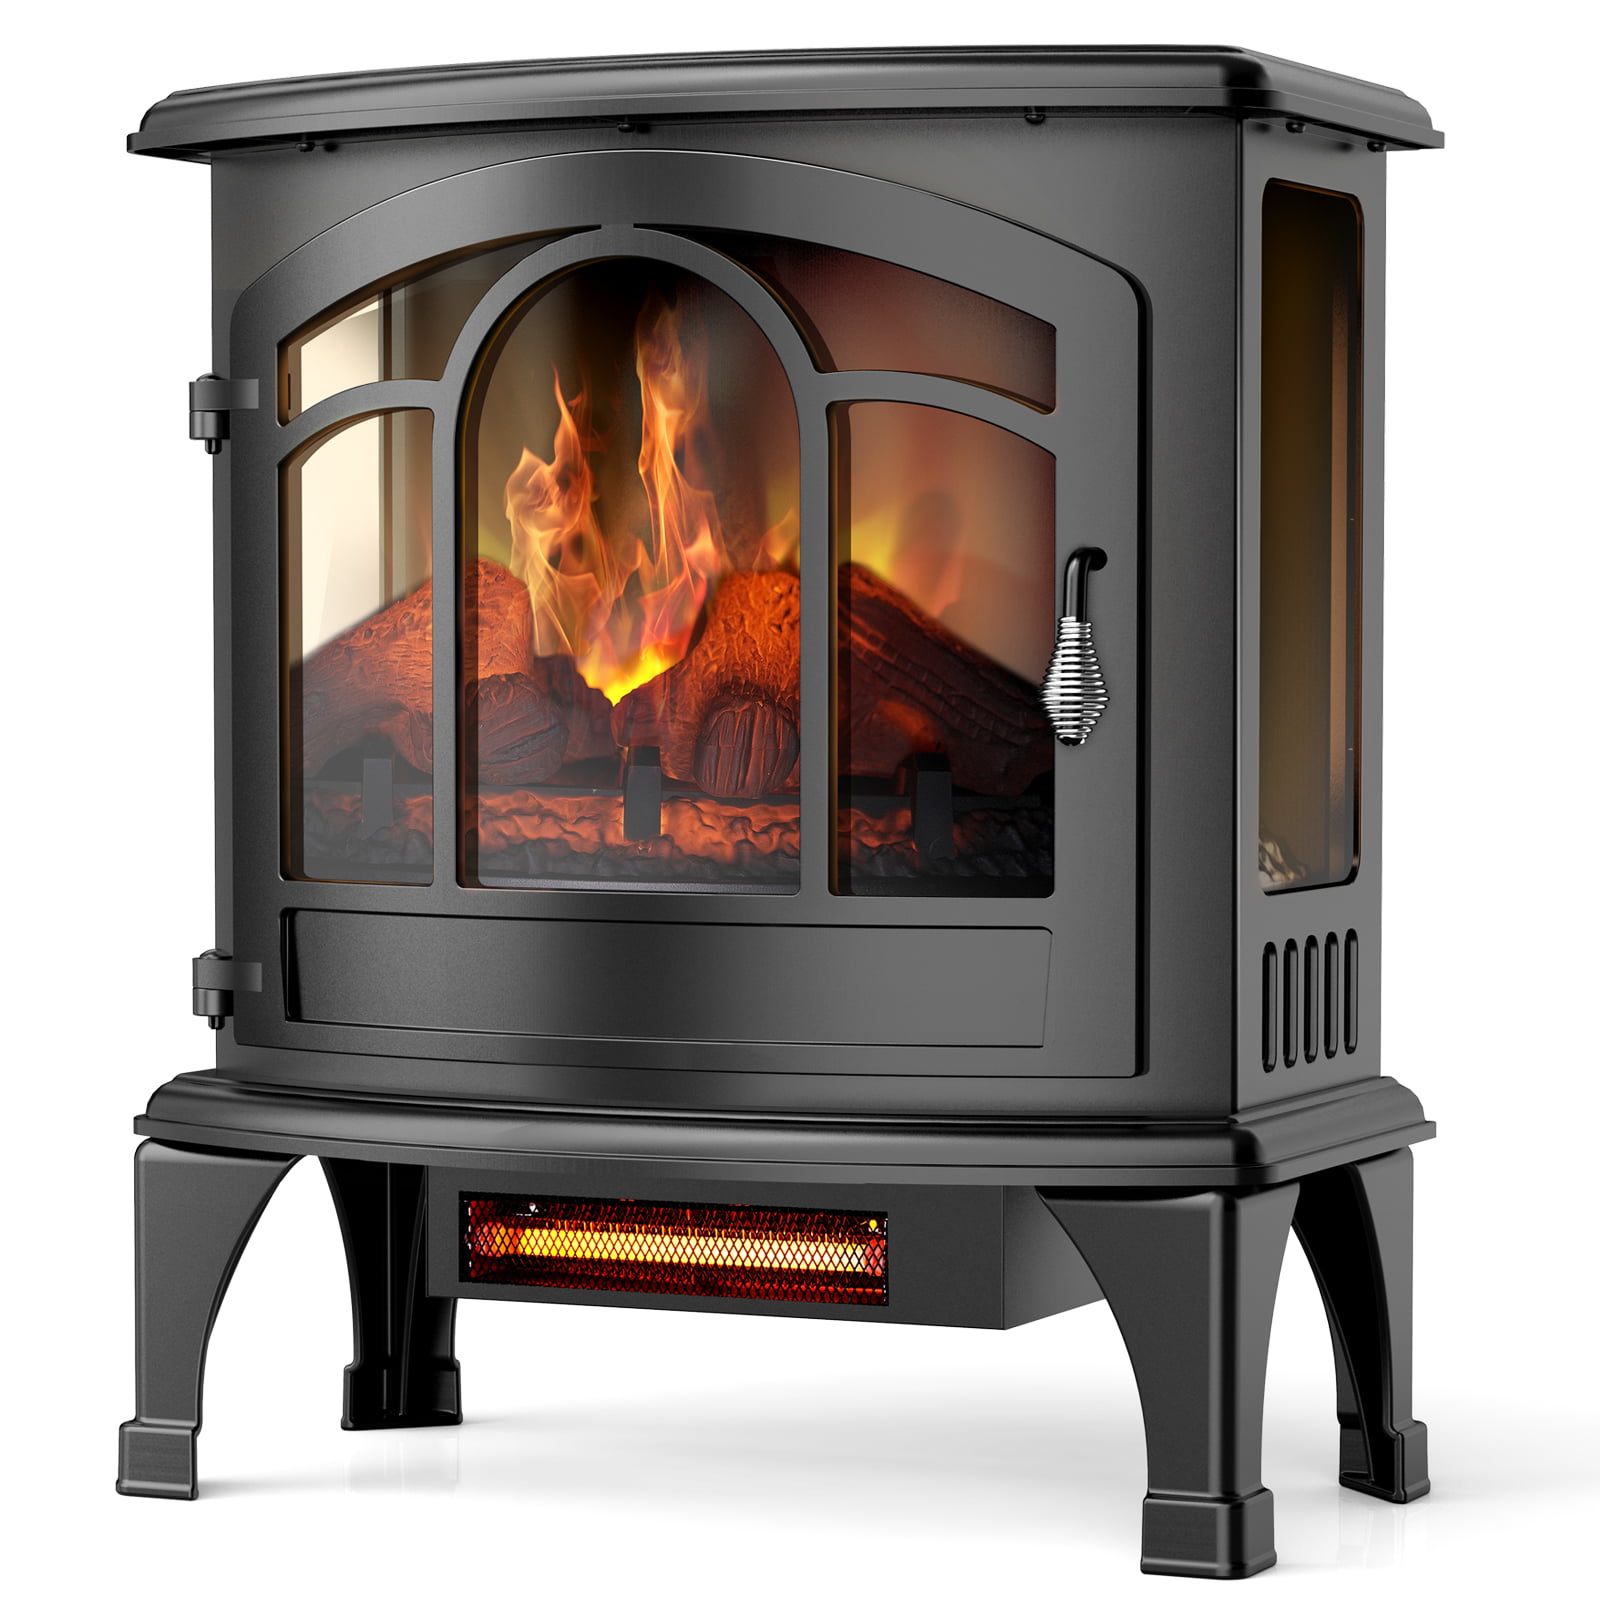 2 Heat Settings Desktop Heater with Flame Effect,Portable Electric Stove Heater with Realistic LED Log Fire Flame Effect 500w Power Remote Control